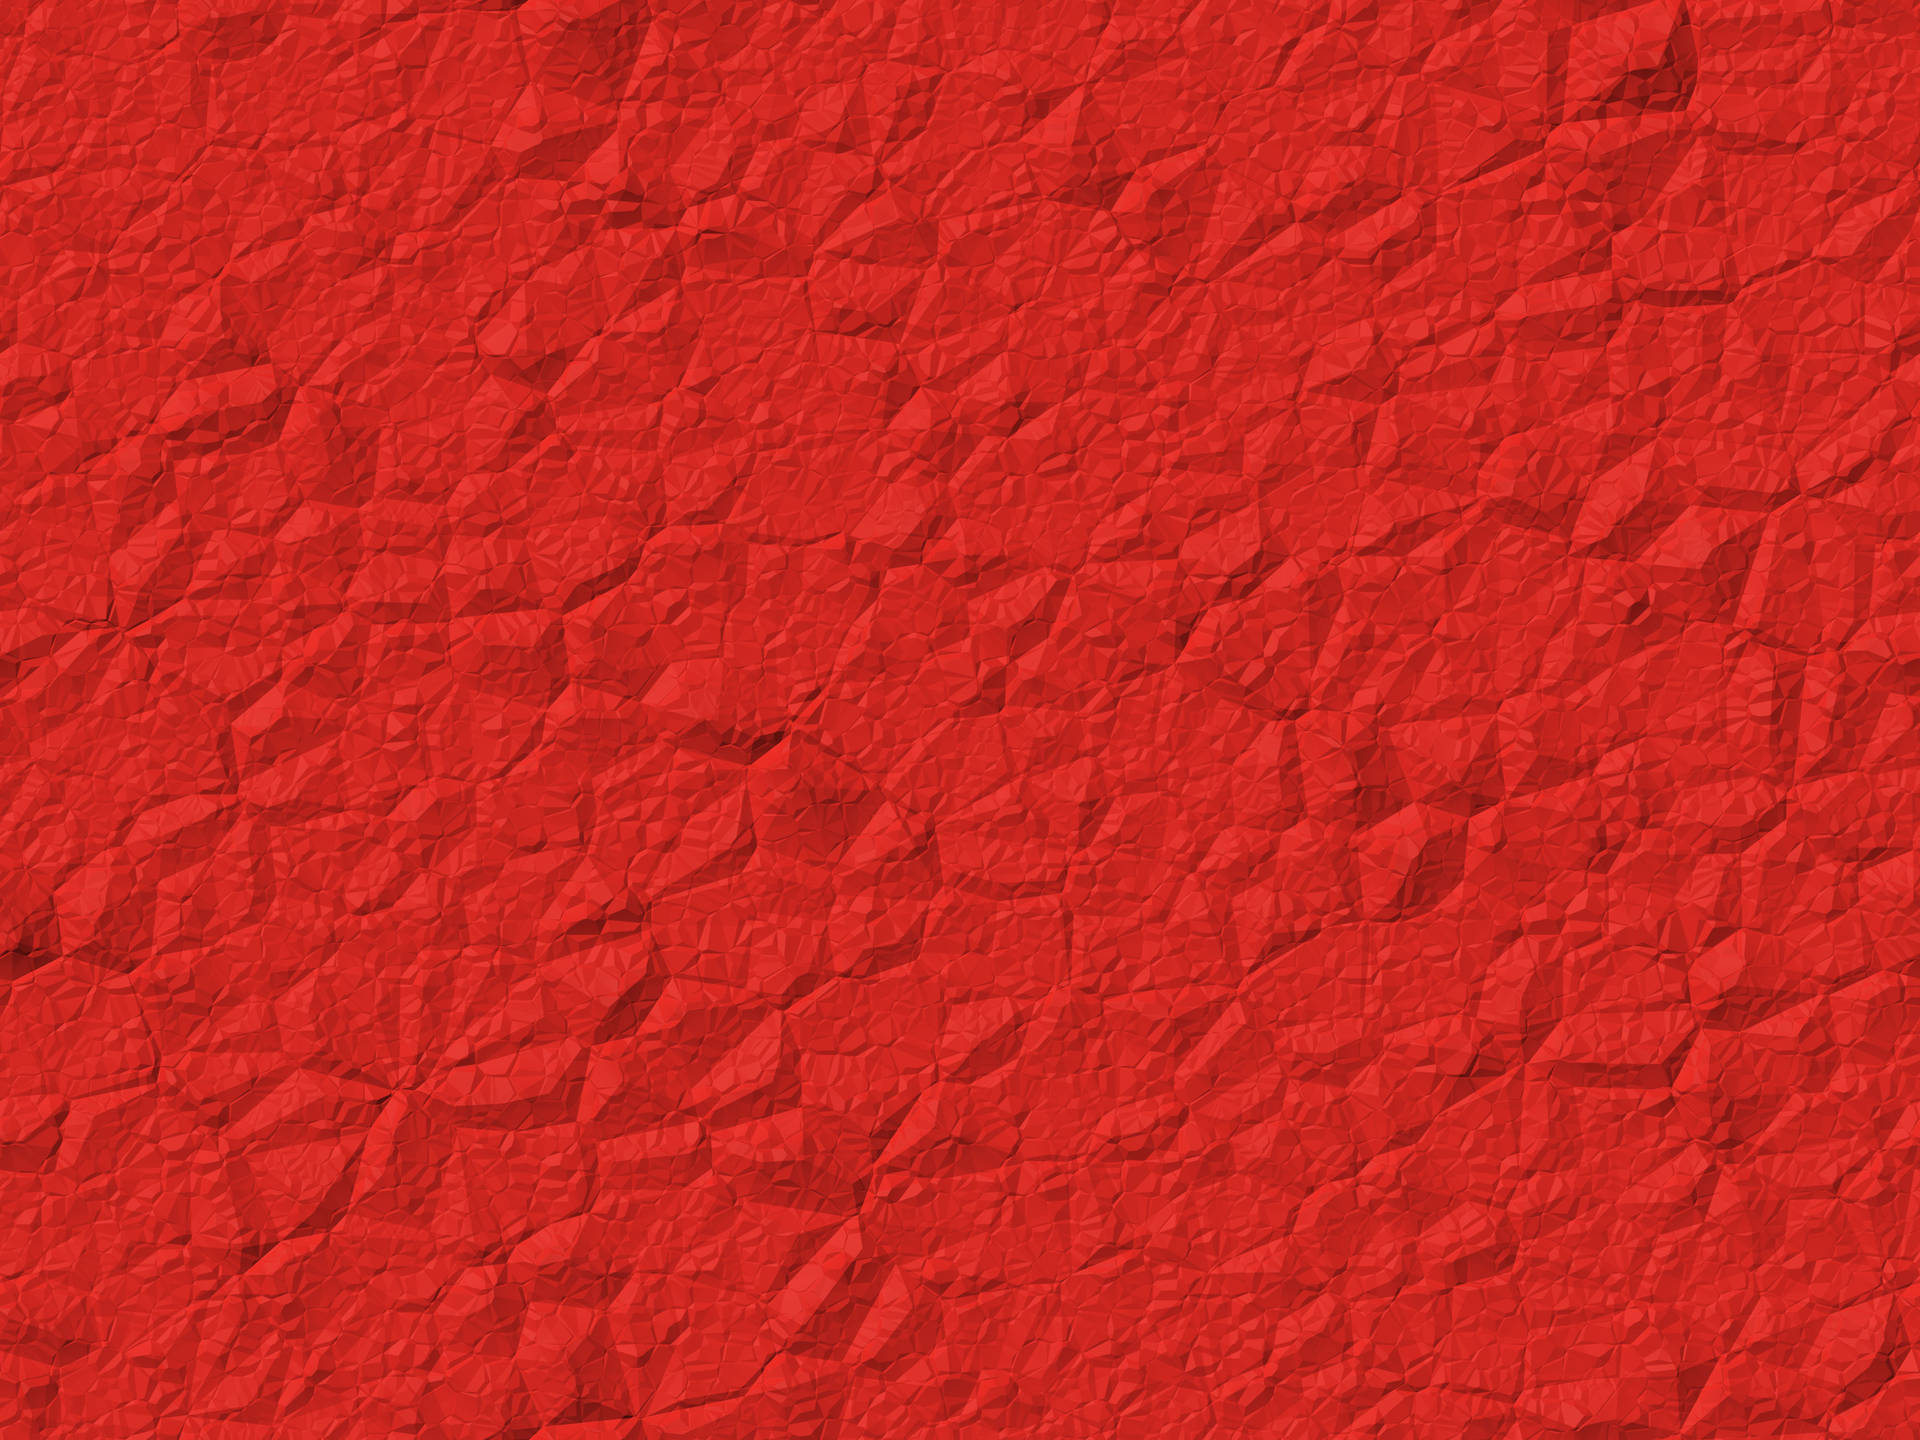 Red 4k Uhd Crumpled Paper Picture